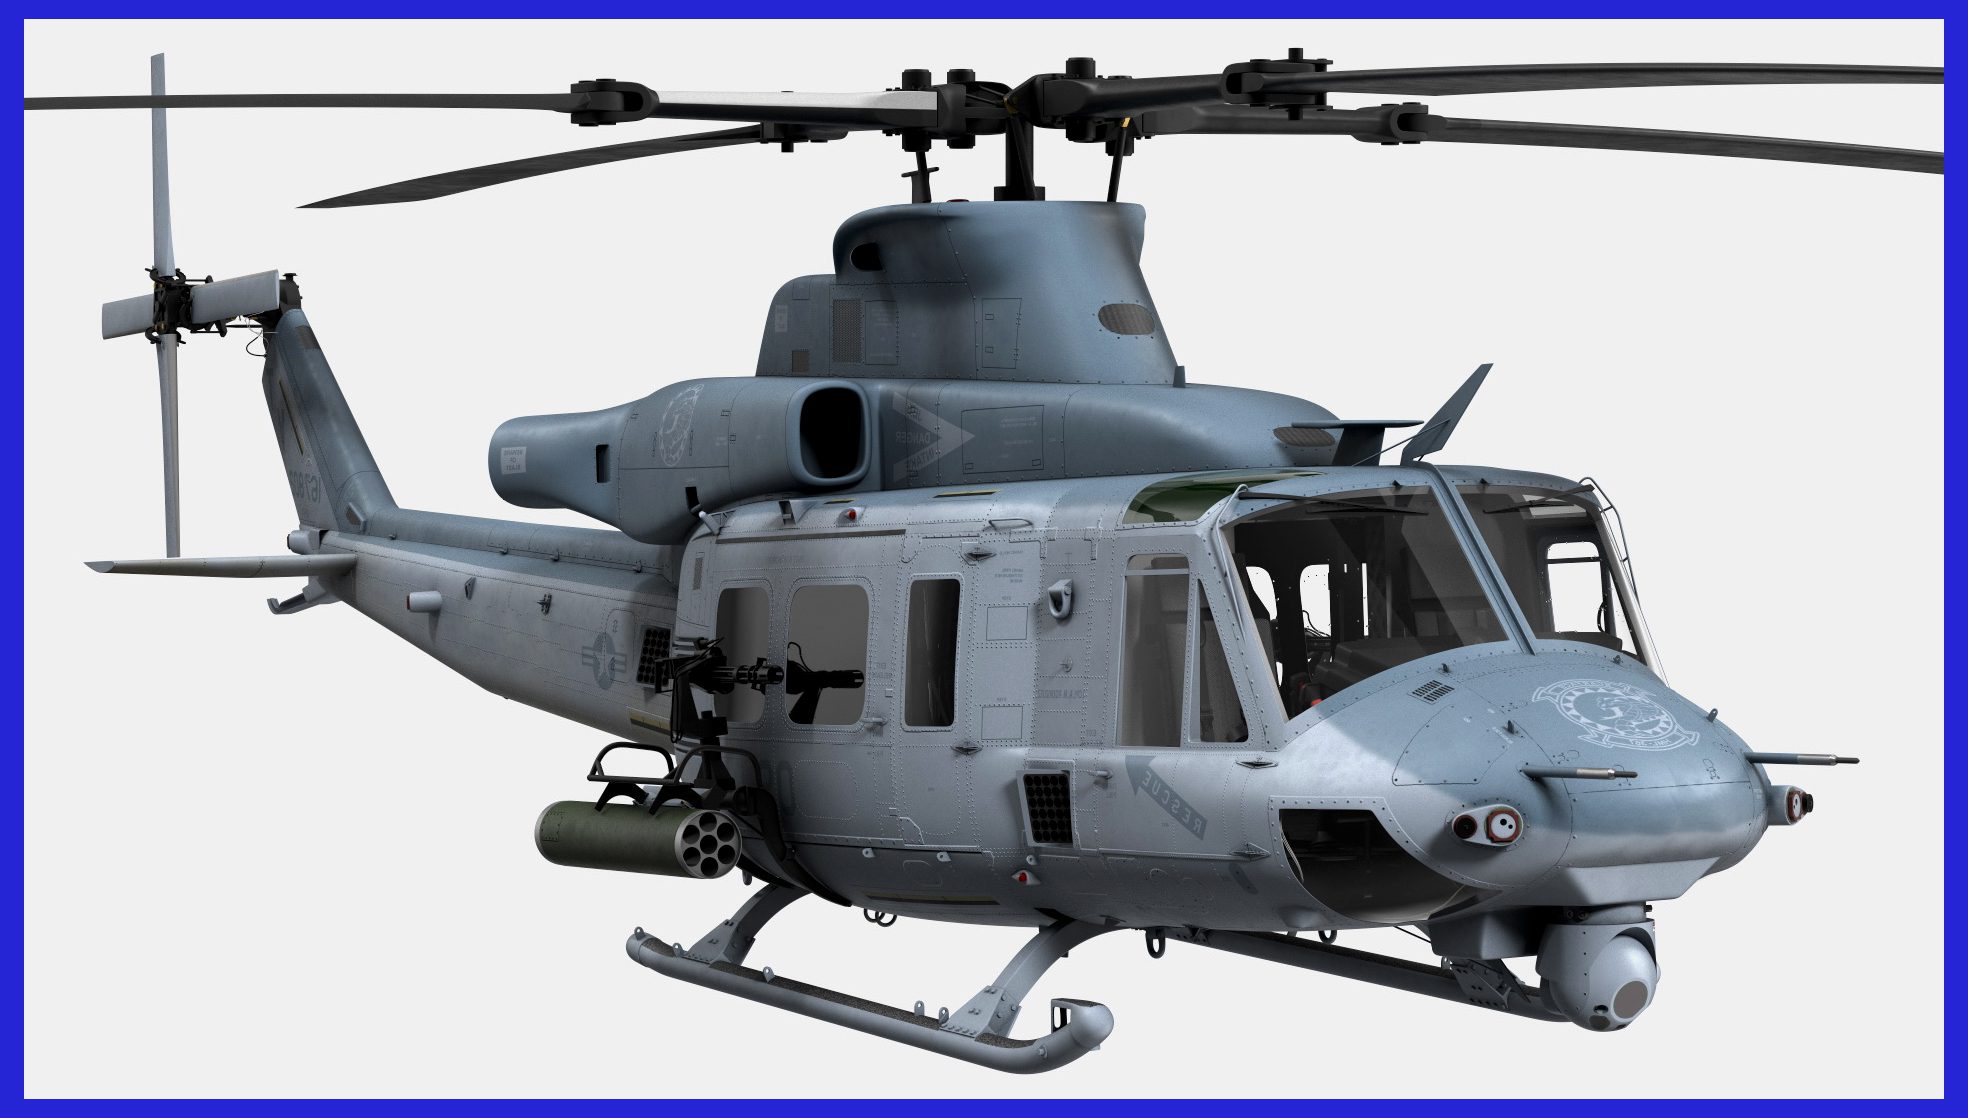 Photo Credit: Turbosquid / Unveiling the Bell UH-1Y Venom from the Huey Family